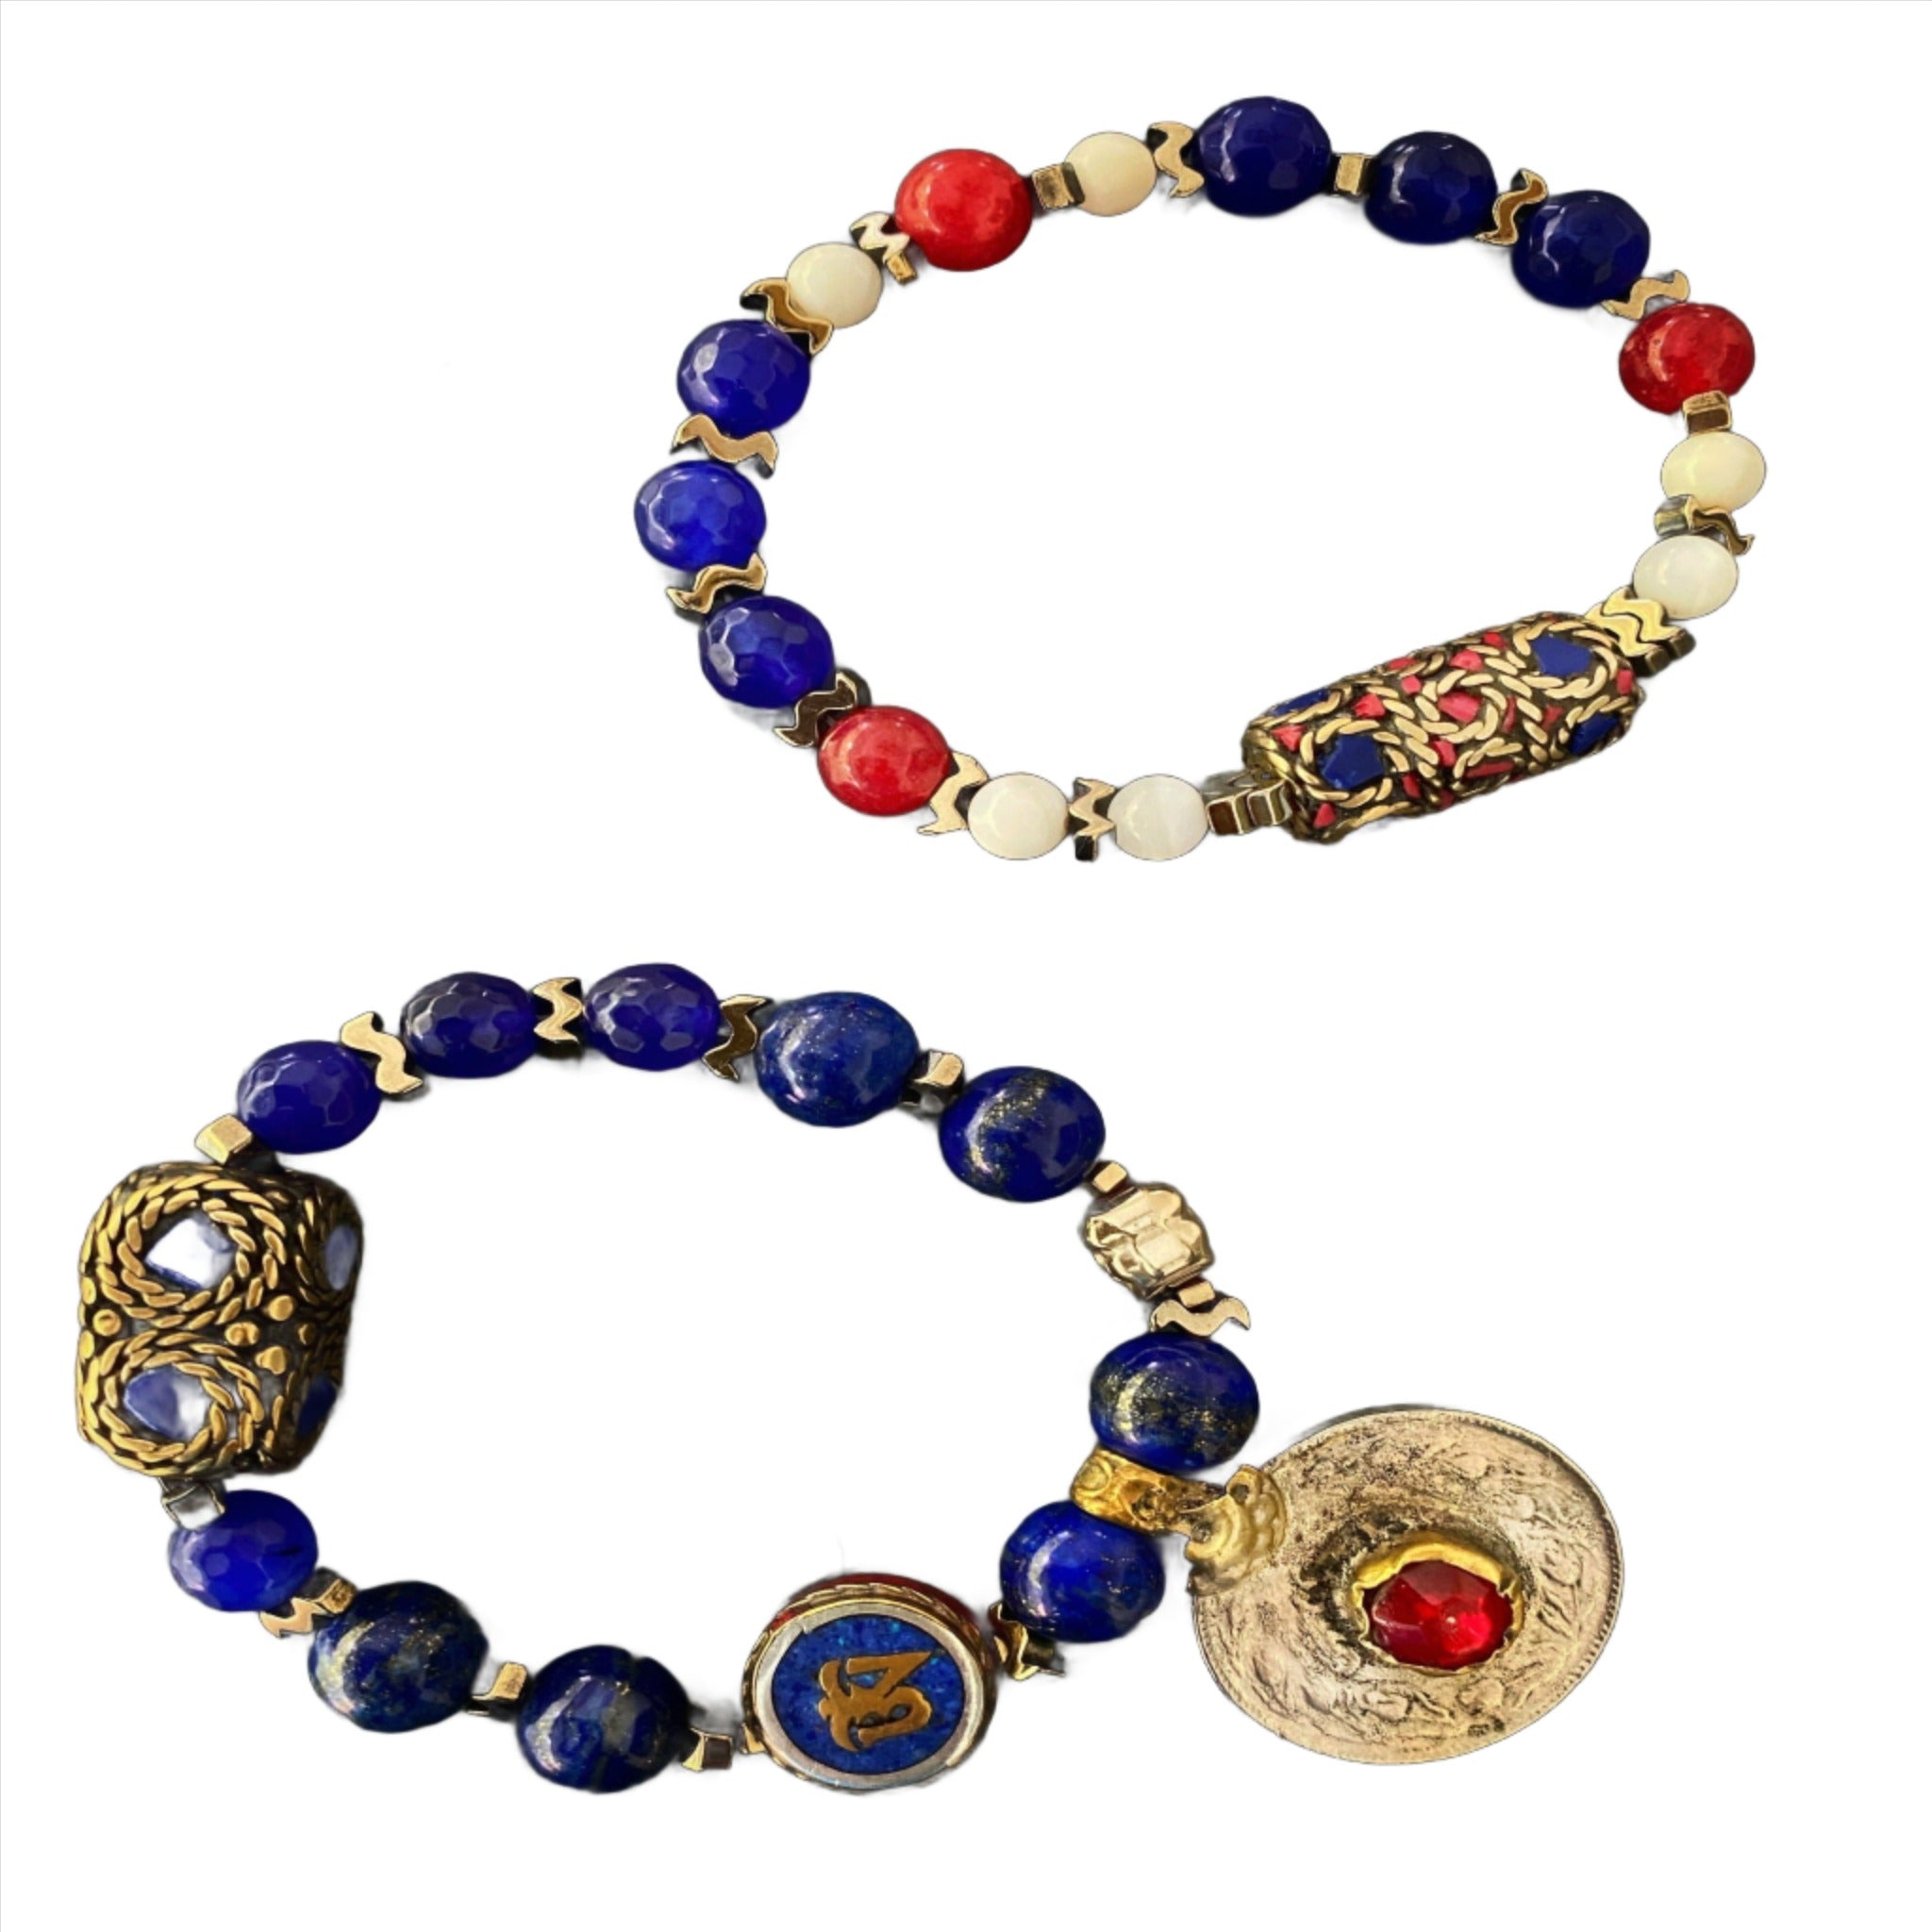 Classy Aegean Bracelet Set with Lapis Lazuli Stone Beads and Handmade Large Nepal Bead with Lapis Lazuli and Red Coral Stones.